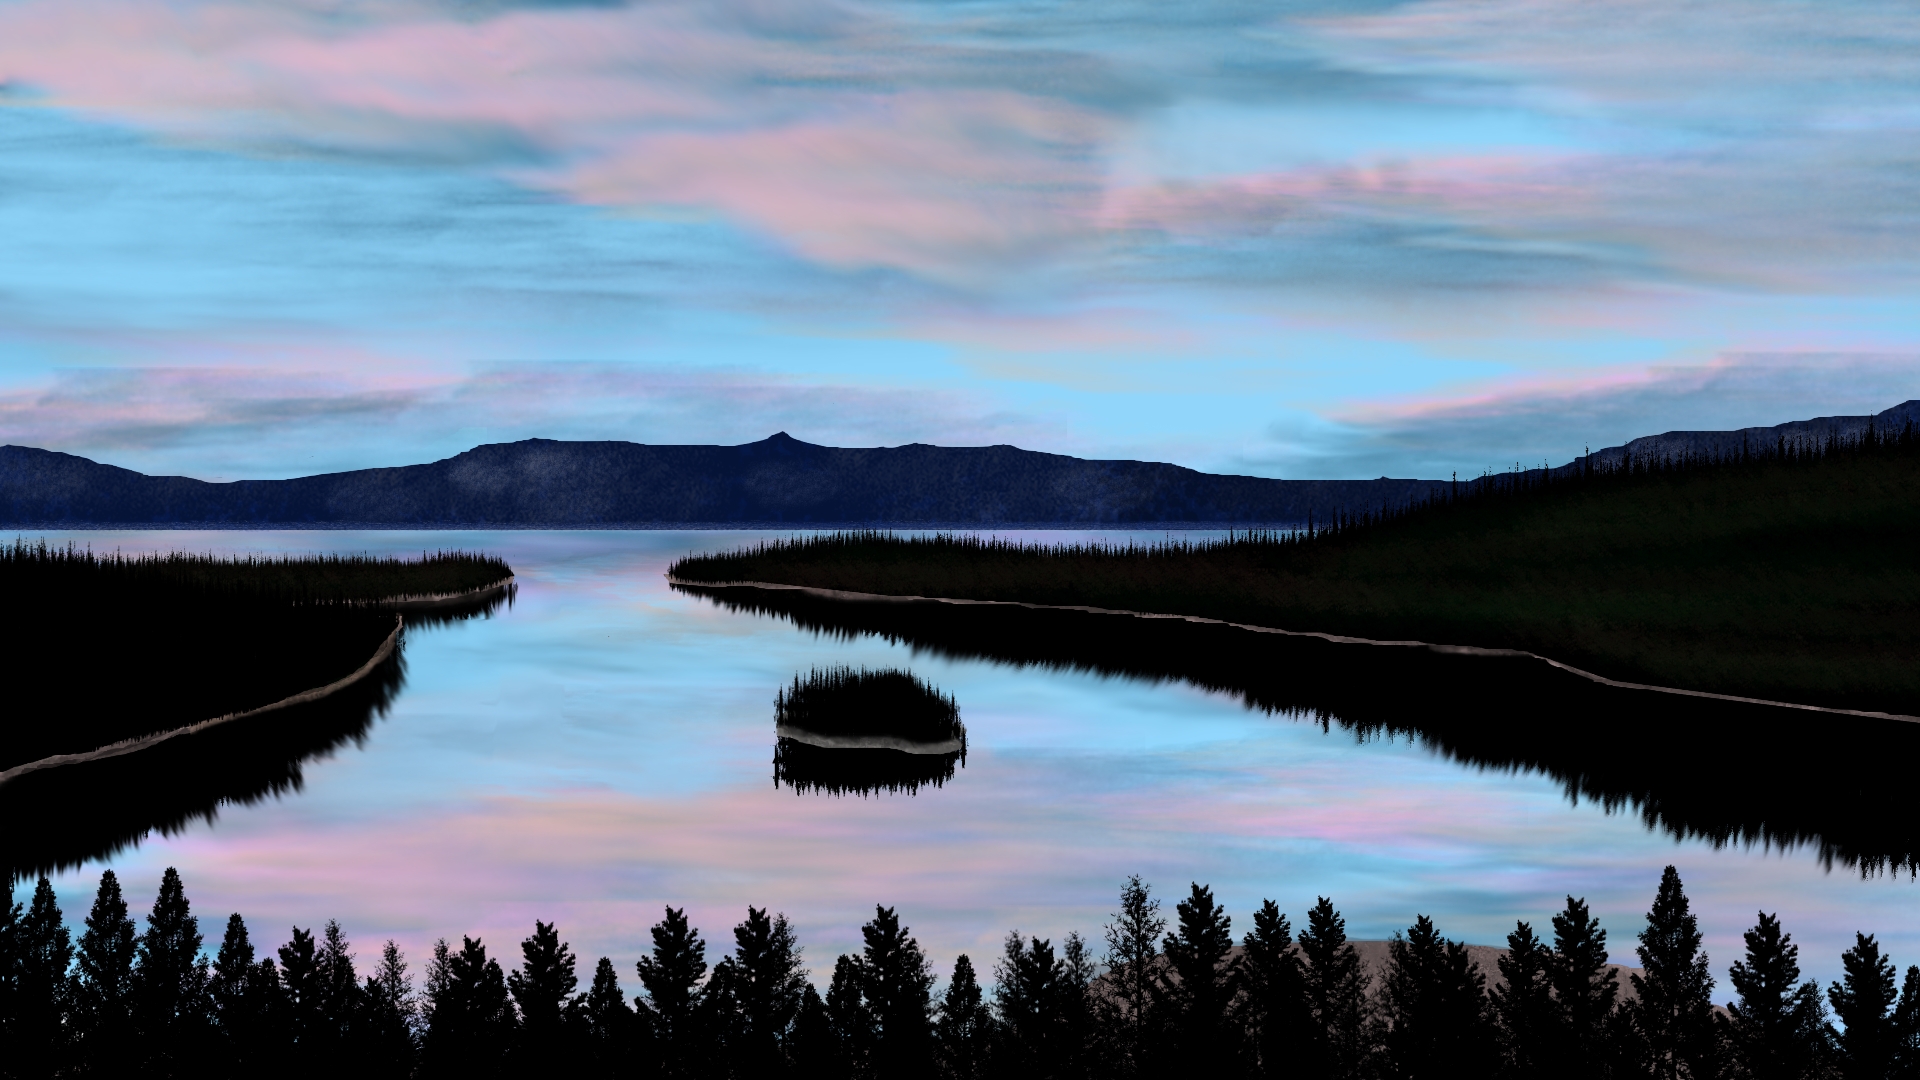 General 1920x1080 digital painting digital art nature landscape sky clouds water reflection trees